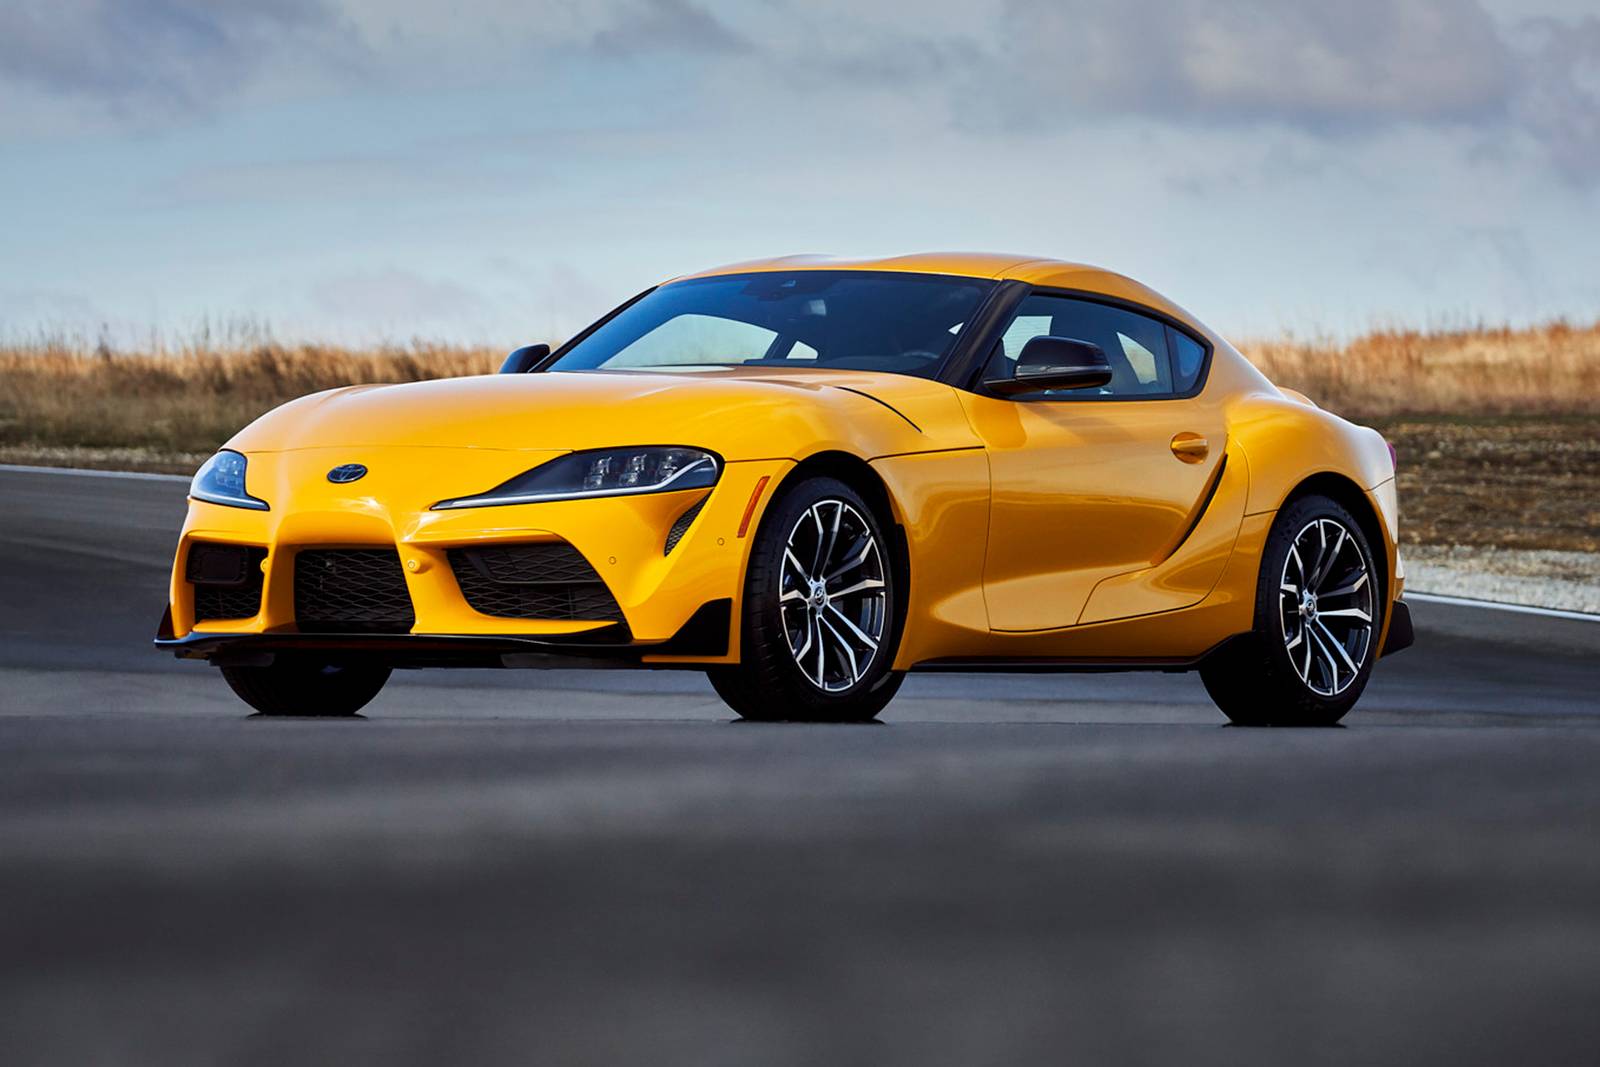 Enjoy the ride with 2022 Toyota GR Supra starting from 64,695